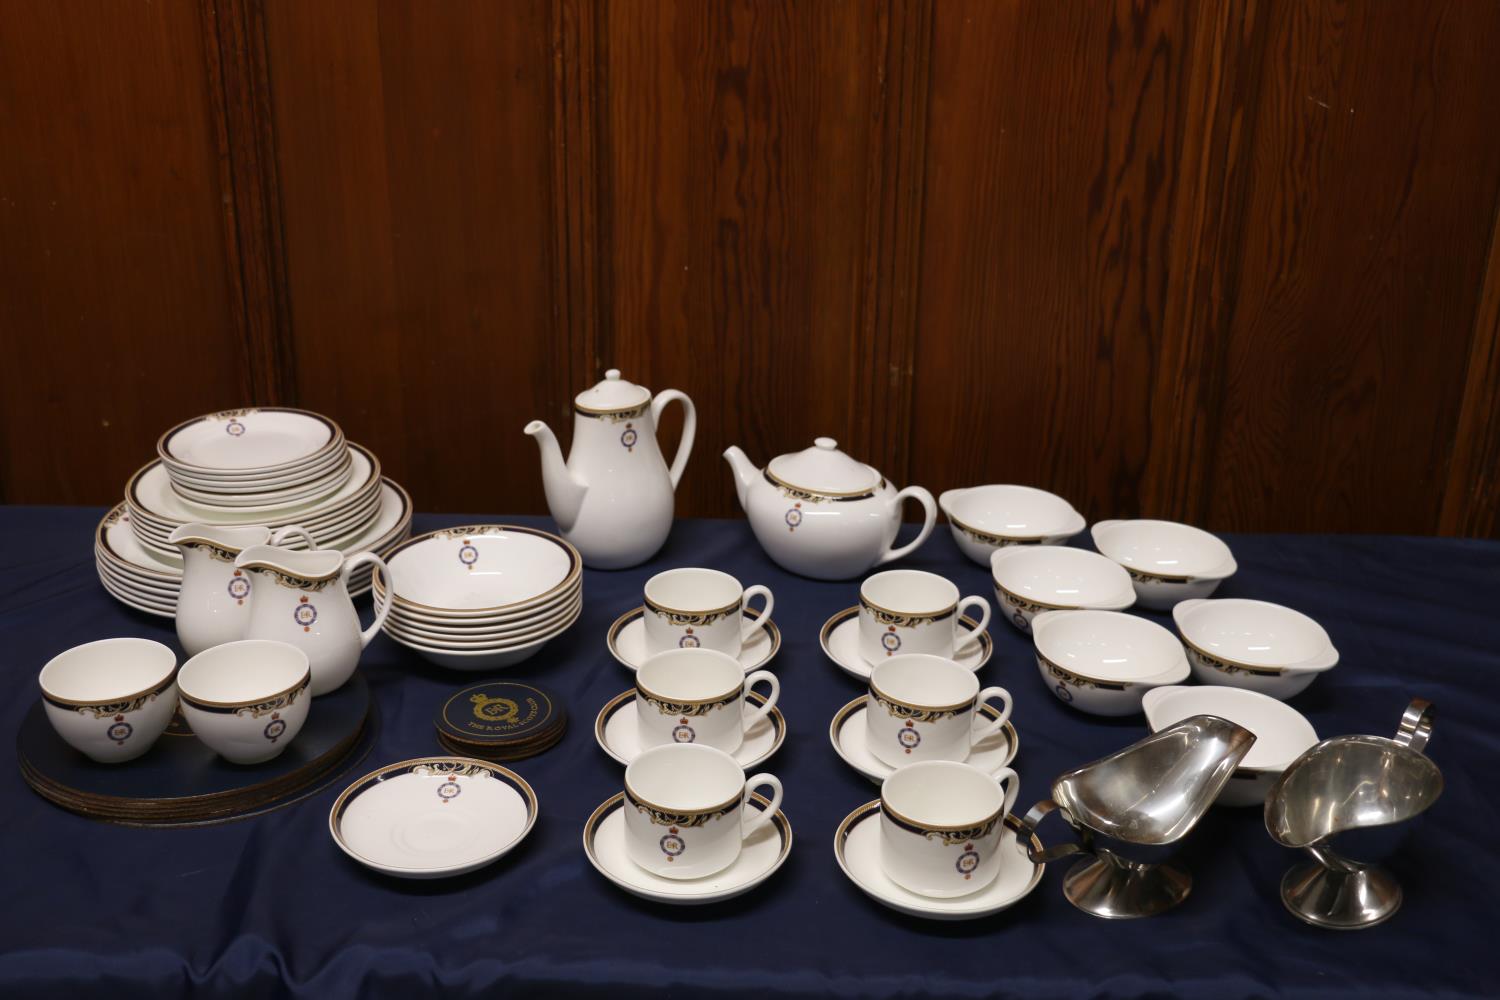 Sixty-piece Wedgwood five-star bone china dinner and tea service from the Royal Scots Club, each